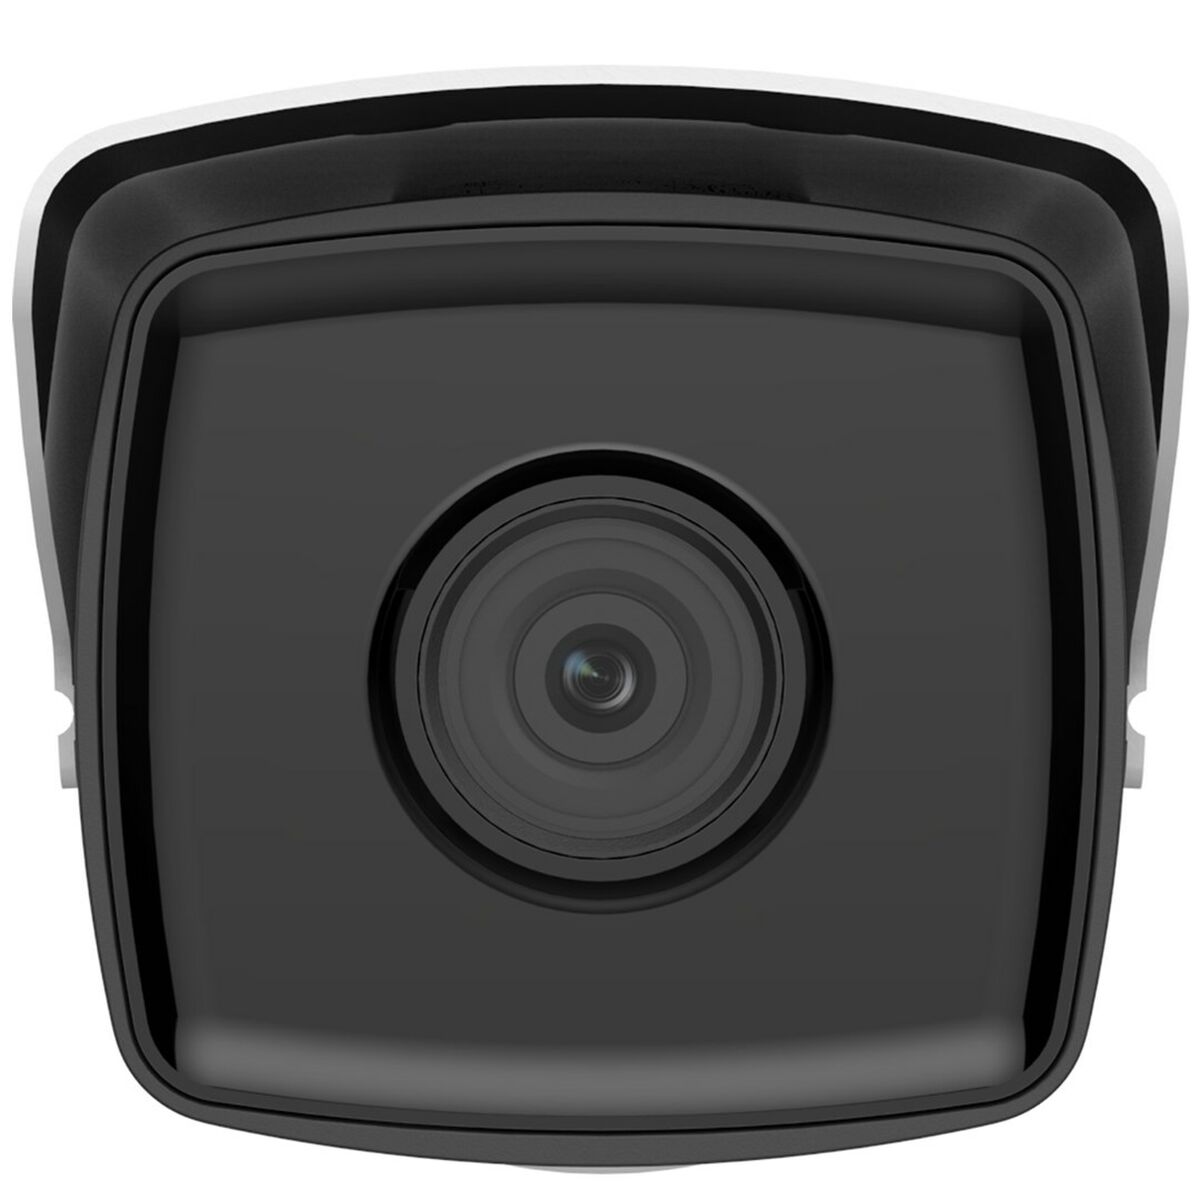 IP-камера Hikvision DS-2CD2T43G2-4I(4mm) Full HD